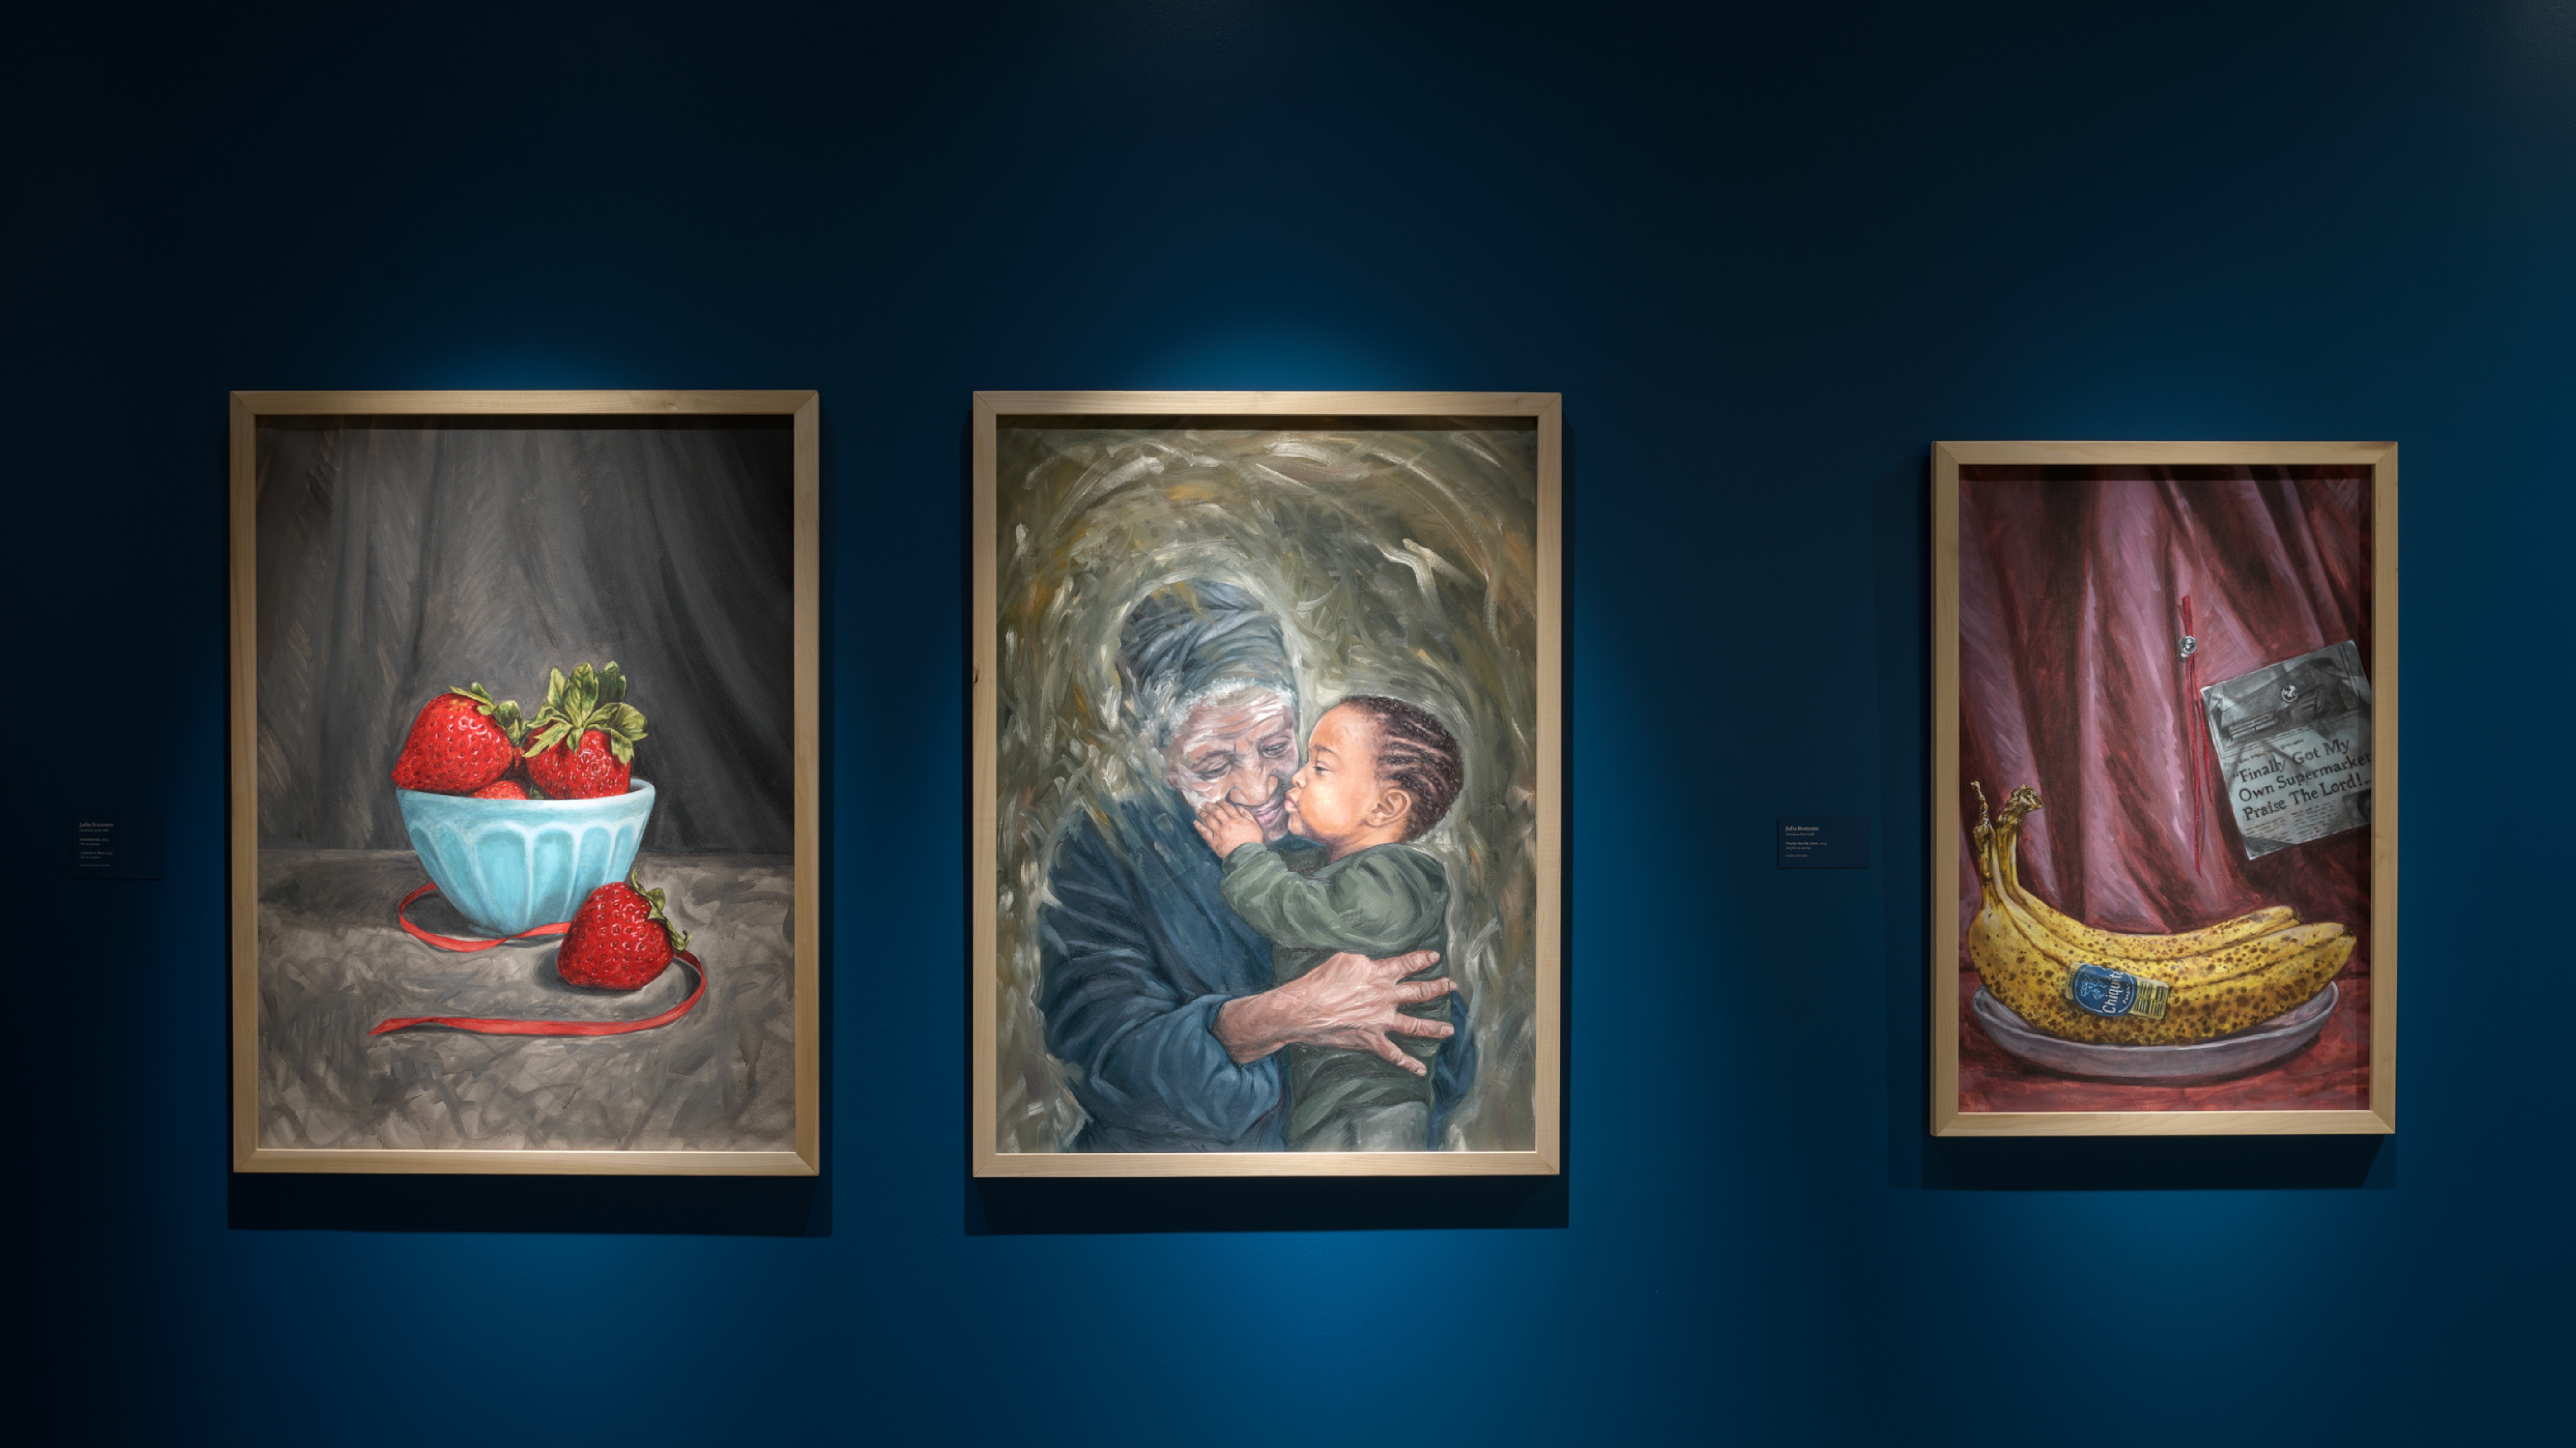 Installation views of three oil paintings in light wooden frames on a blue wall, the left being a still life of strawberries in a blue bowl, the middle a portrait of an older woman with dark skin tone embracing a young toddler with medium to dark skin tone wearing a green hoodie, and the right being a still life of two bananas with a newspaper clipping behind them